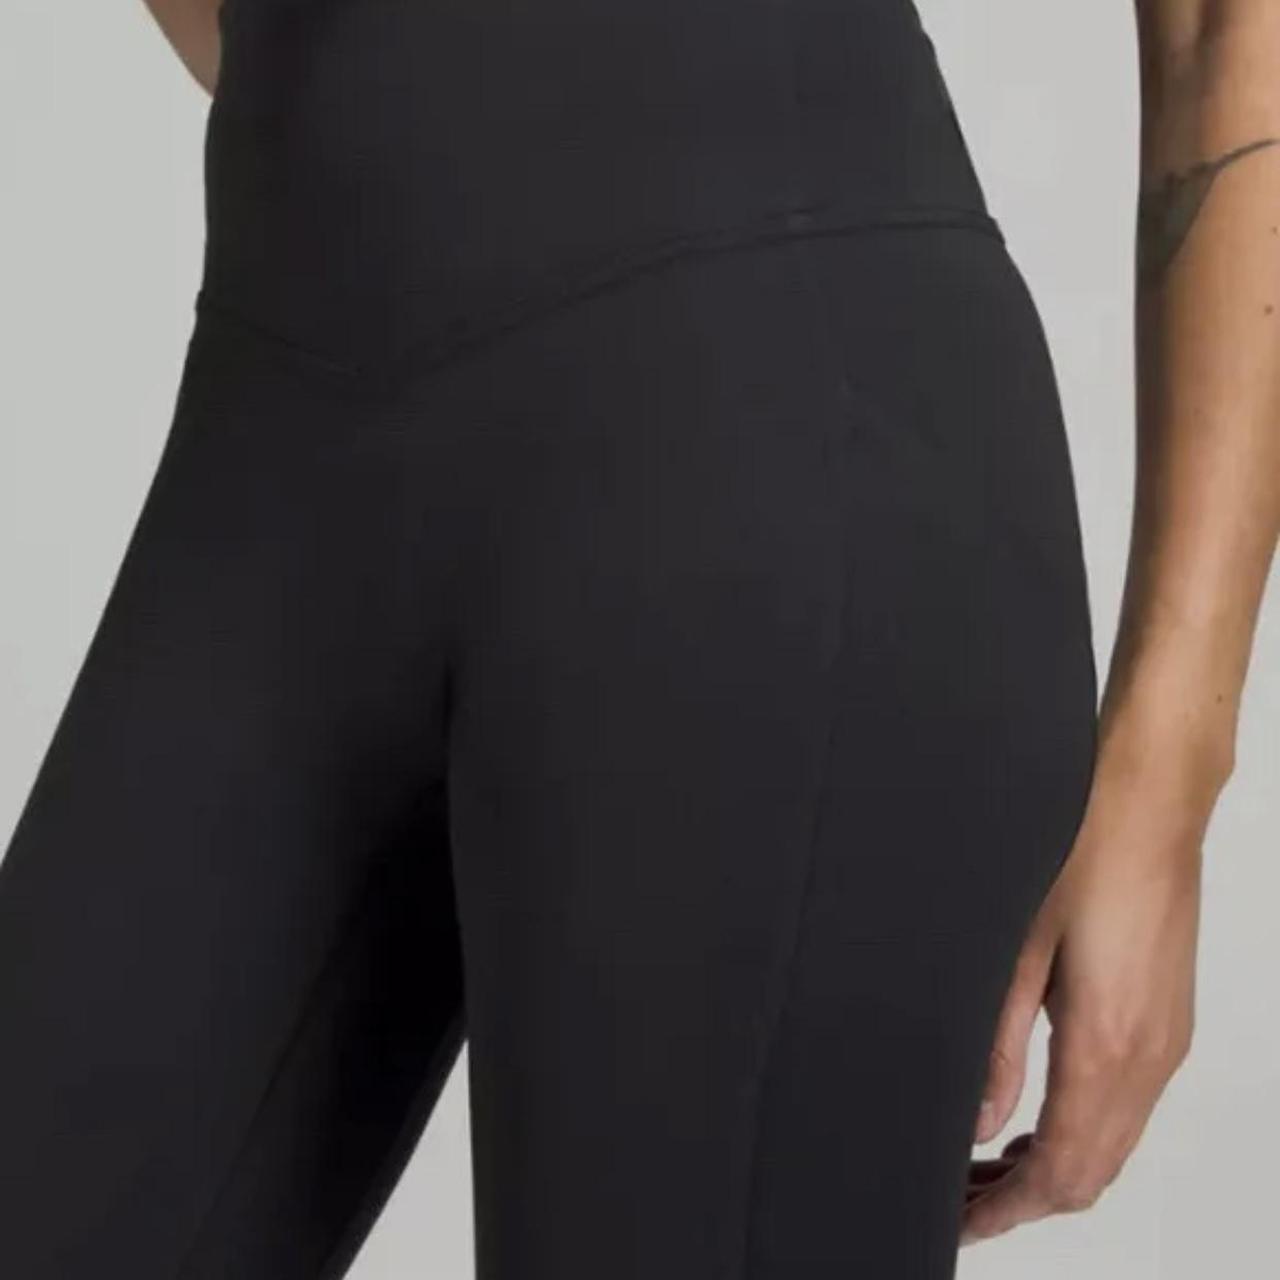 All The Right Places Crop 23” - lululemon Leggings On Sale